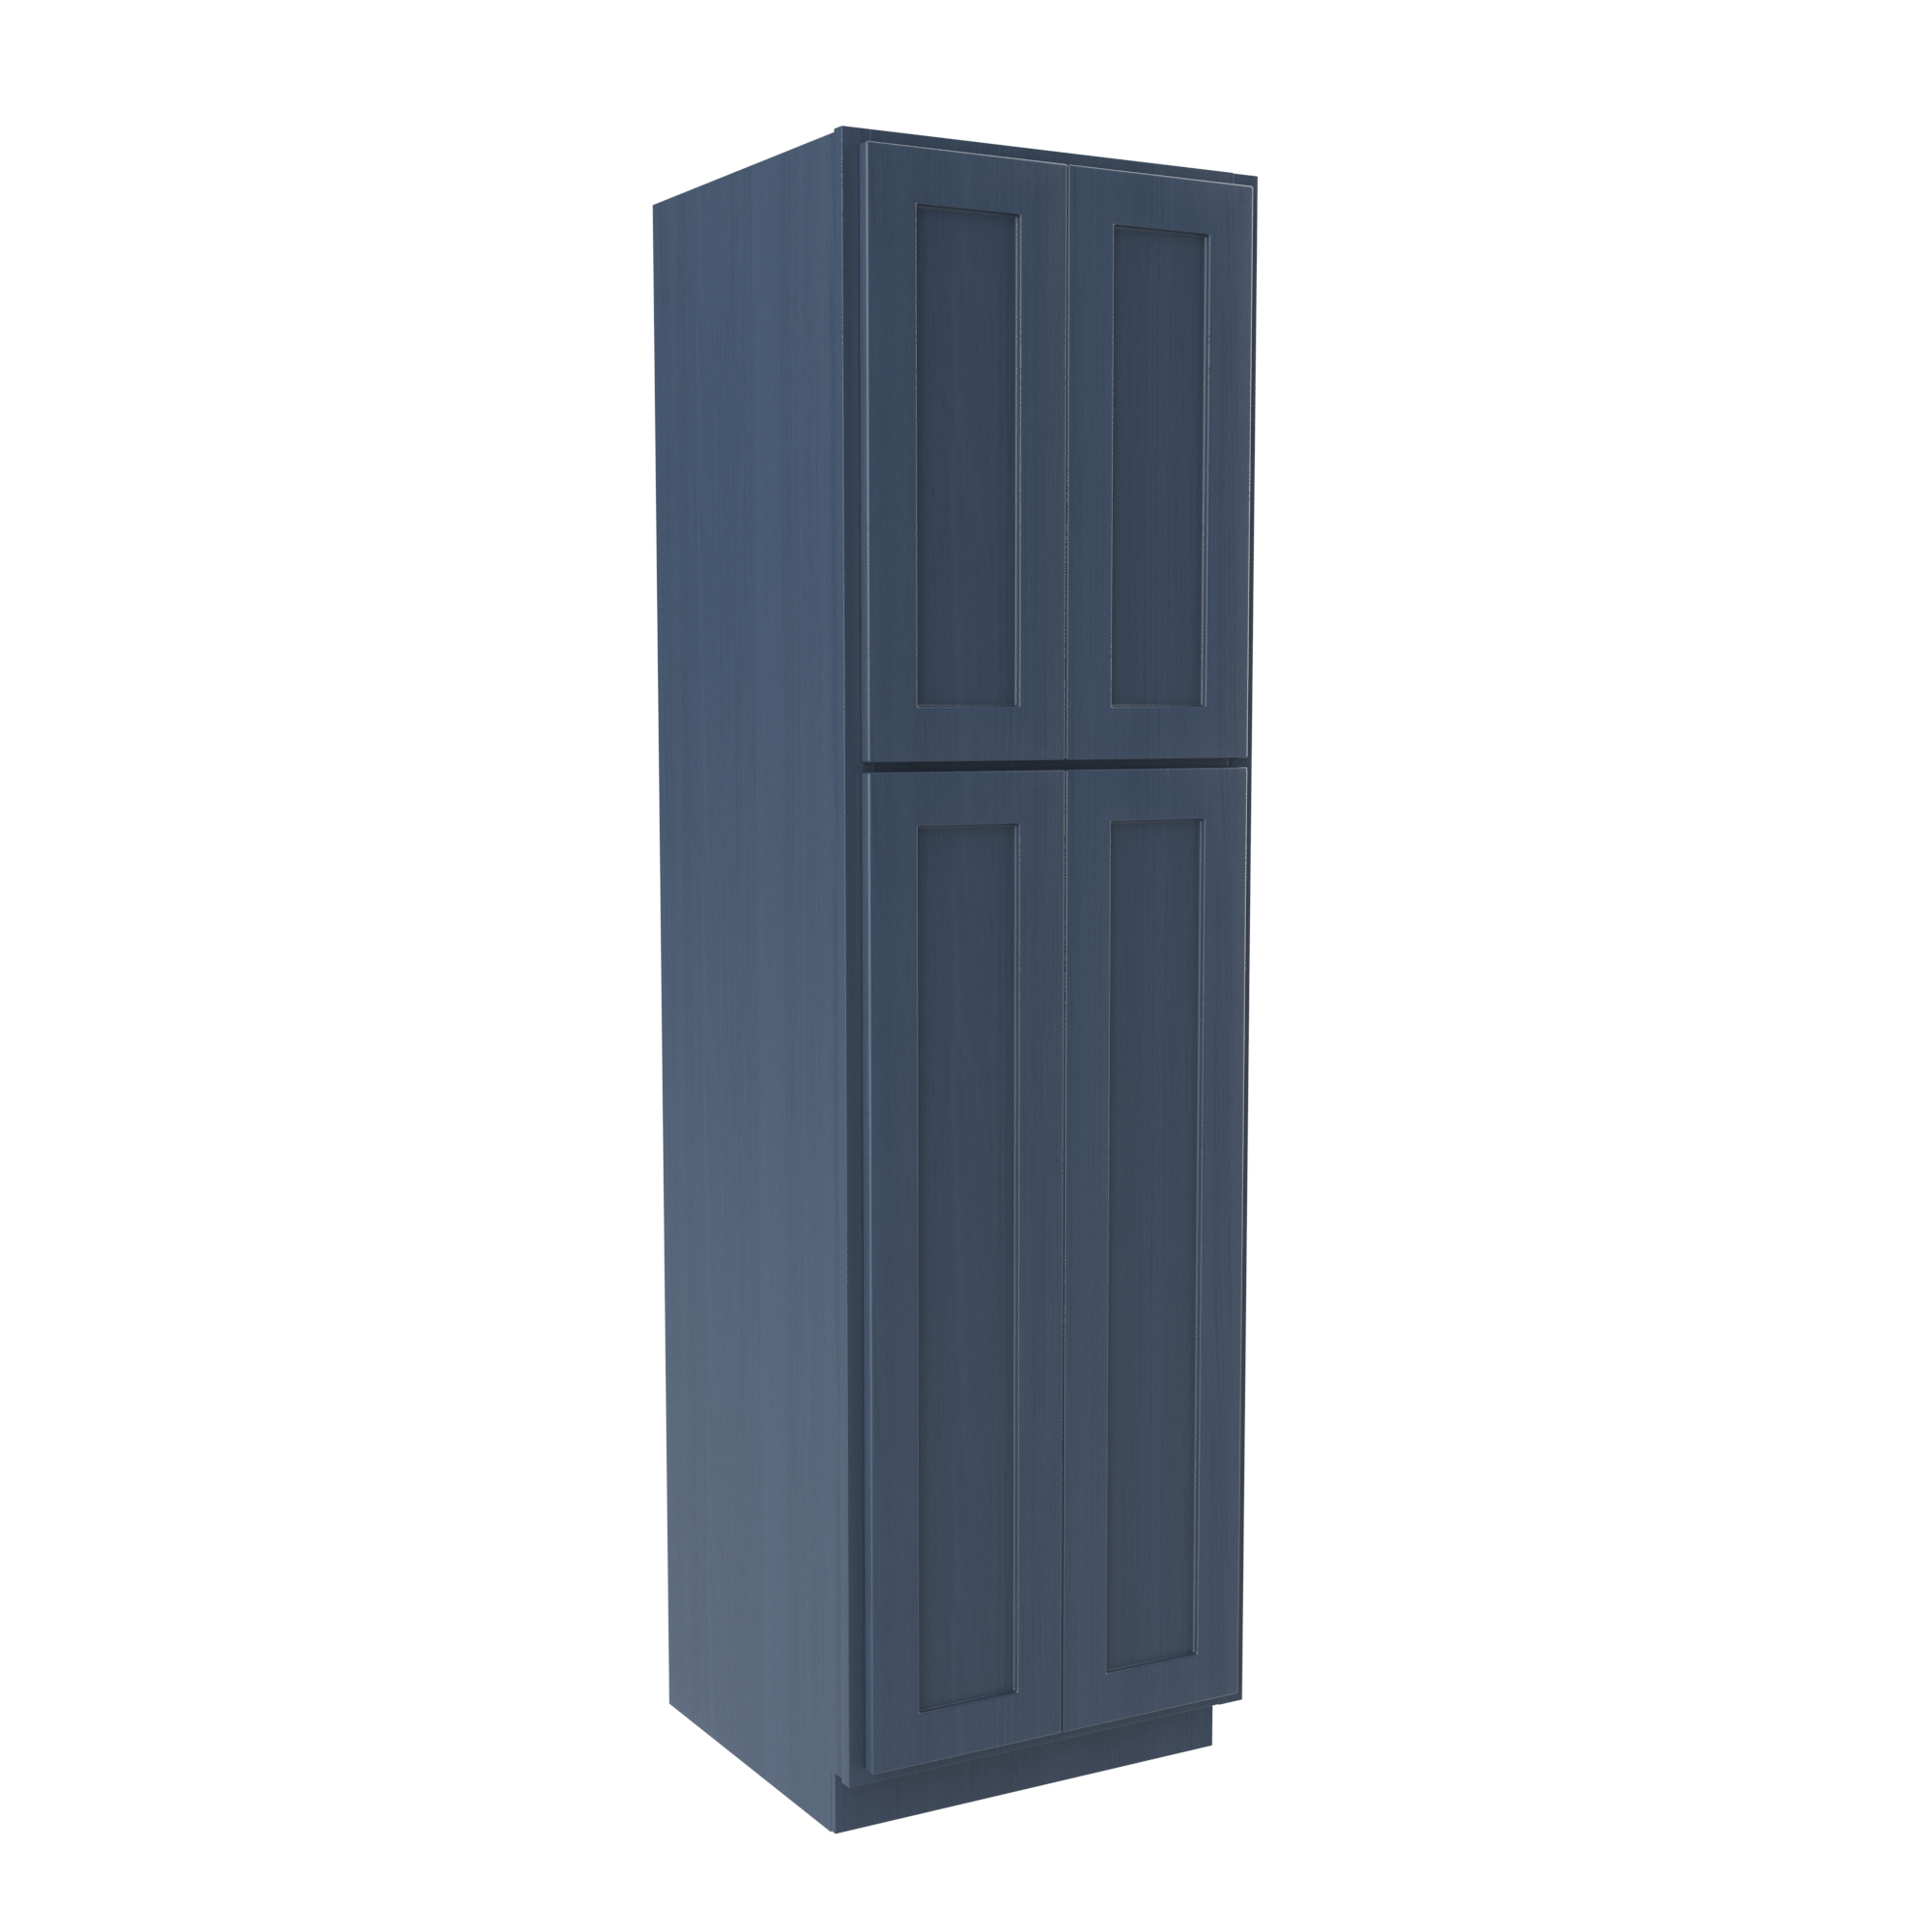 Wall Pantry Cabinet - 24W x 84H x 24D - Blue Shaker Cabinet - RTA